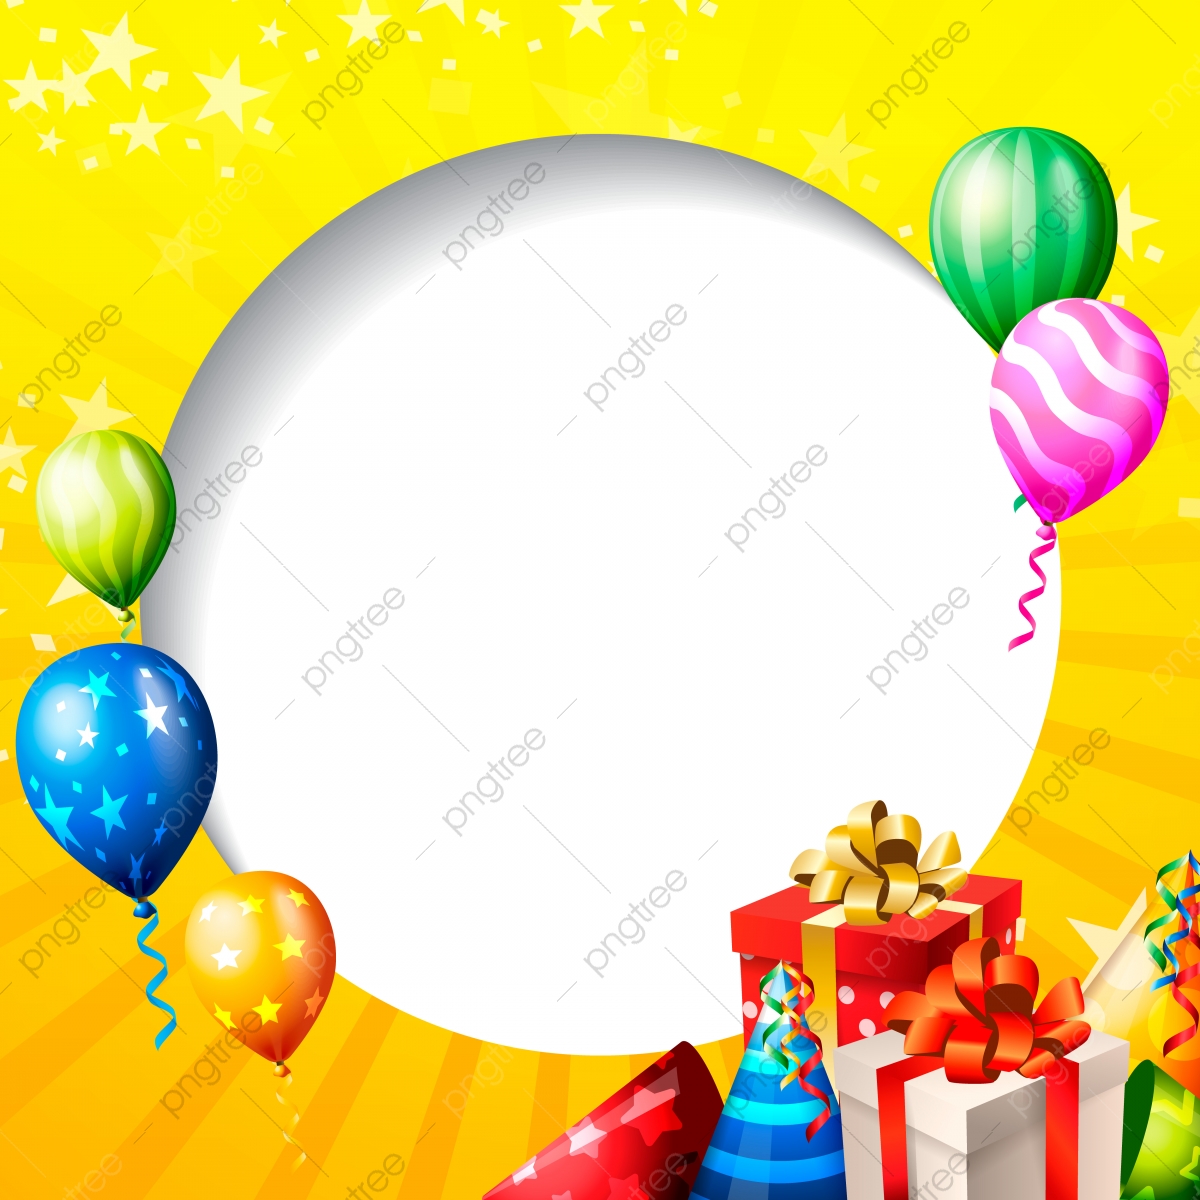 Wallpaper Birthday Party Background